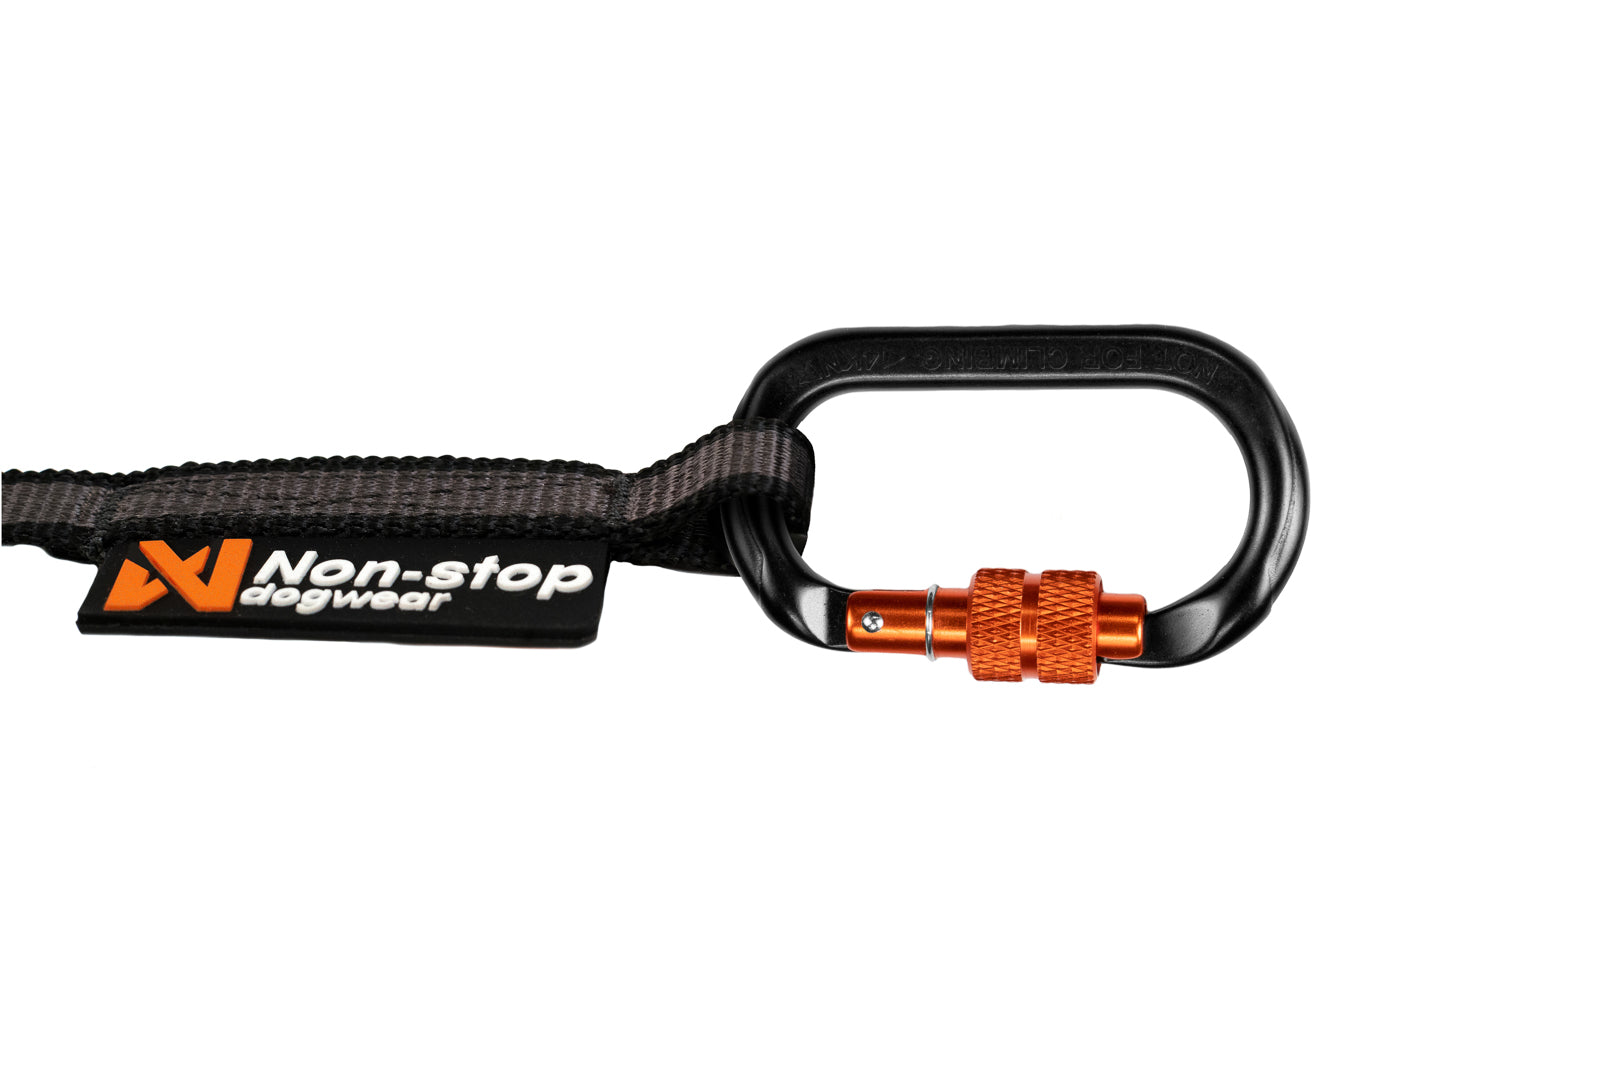 Touring Bungee Leash